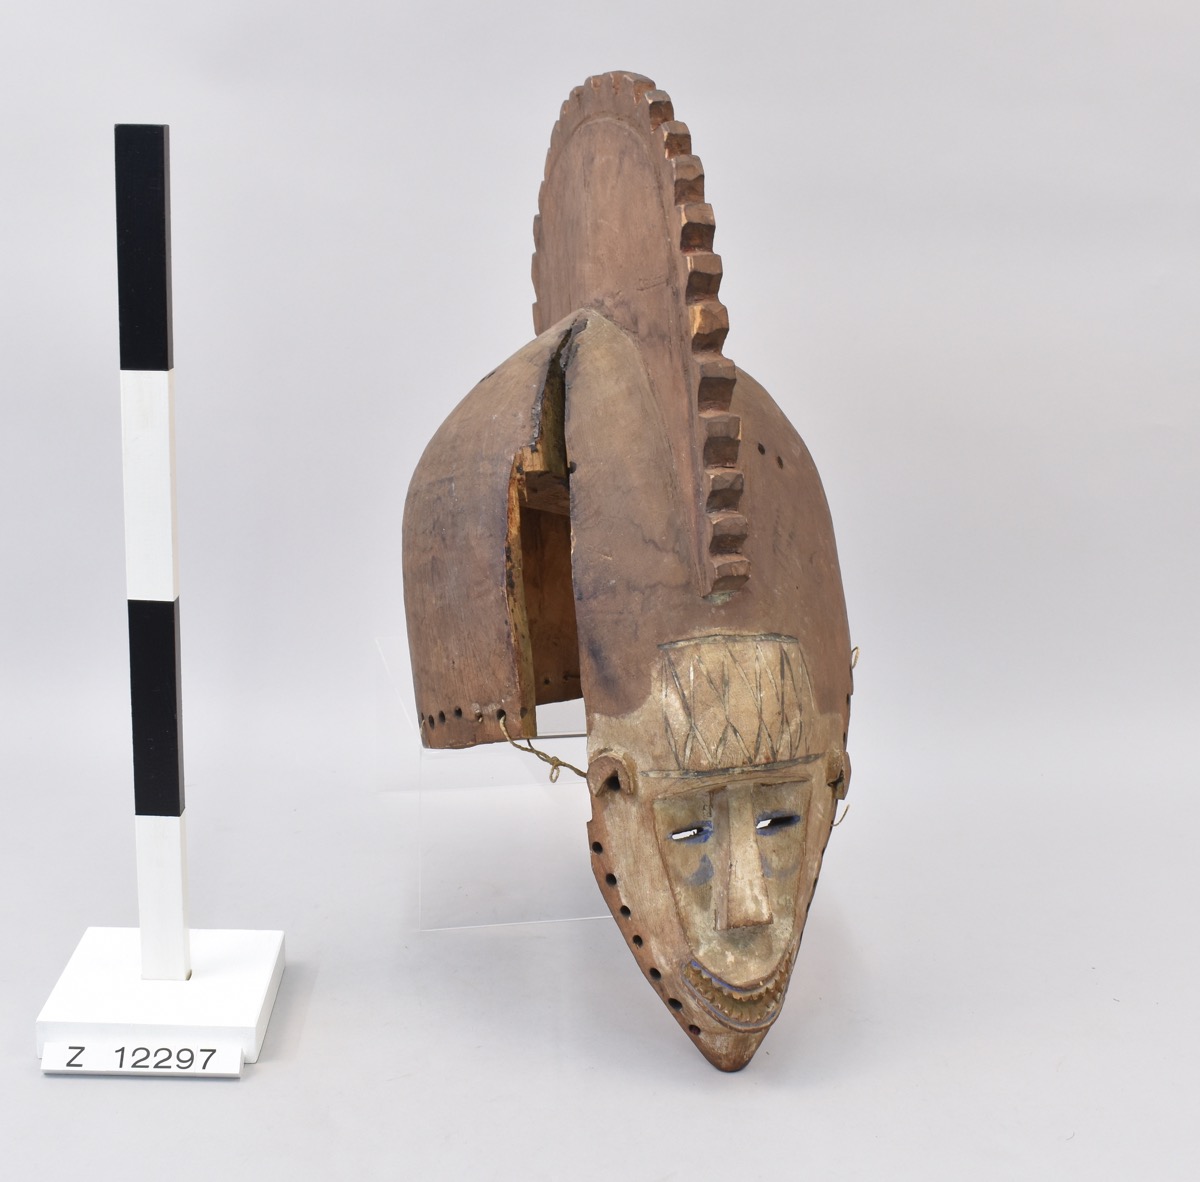 Obo or wooden helmet mask. Small face has narrow eye slits, cheeks and mouth decorated with blue